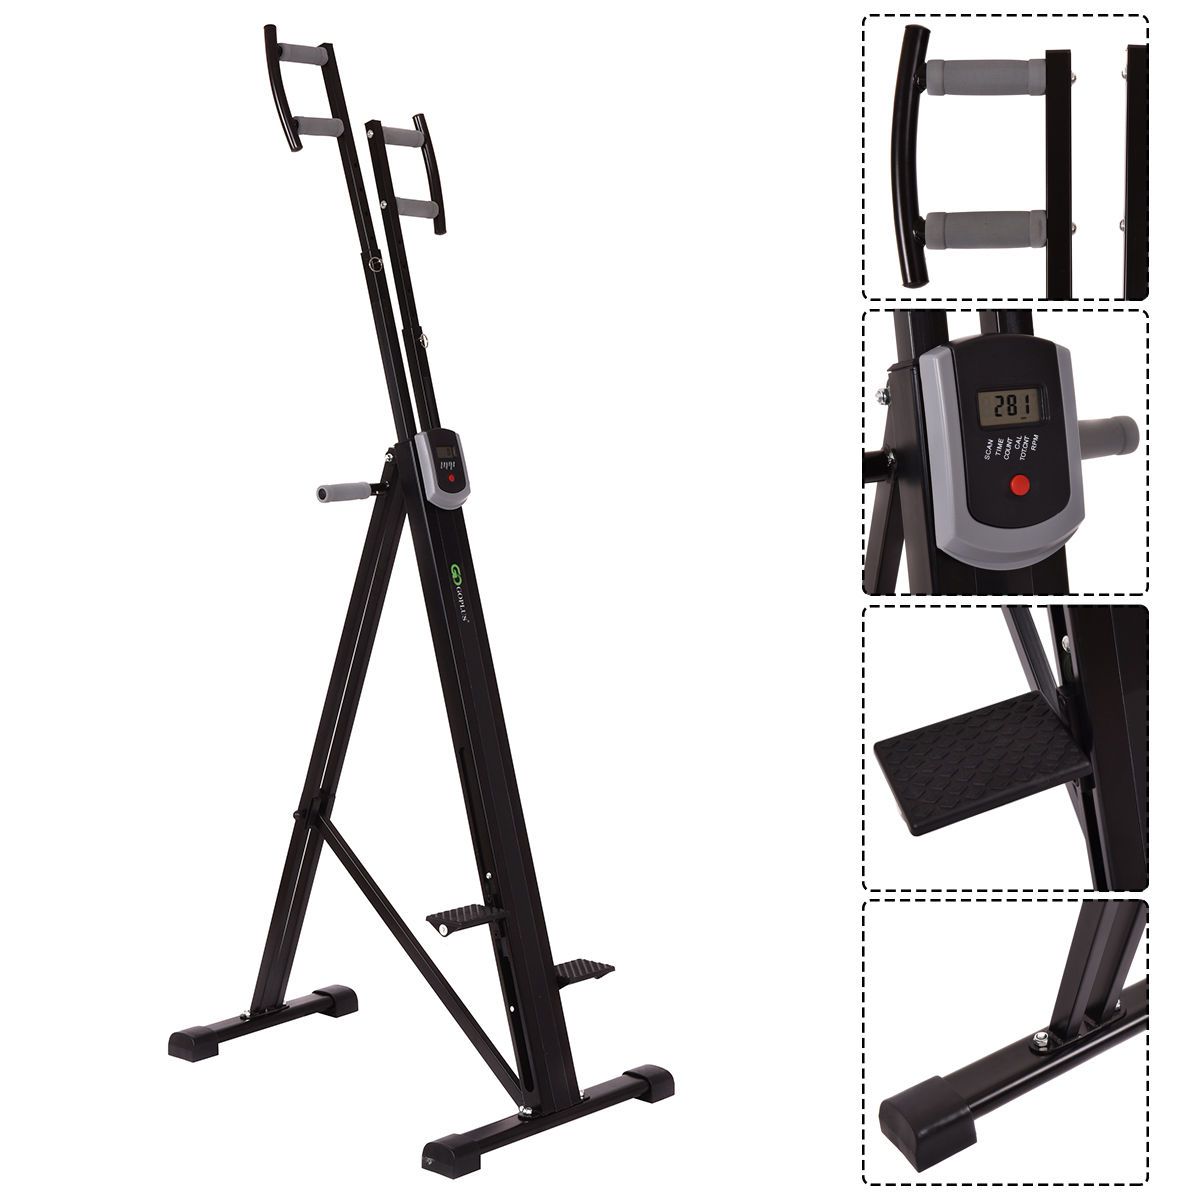 What is a vertical climbing machine?